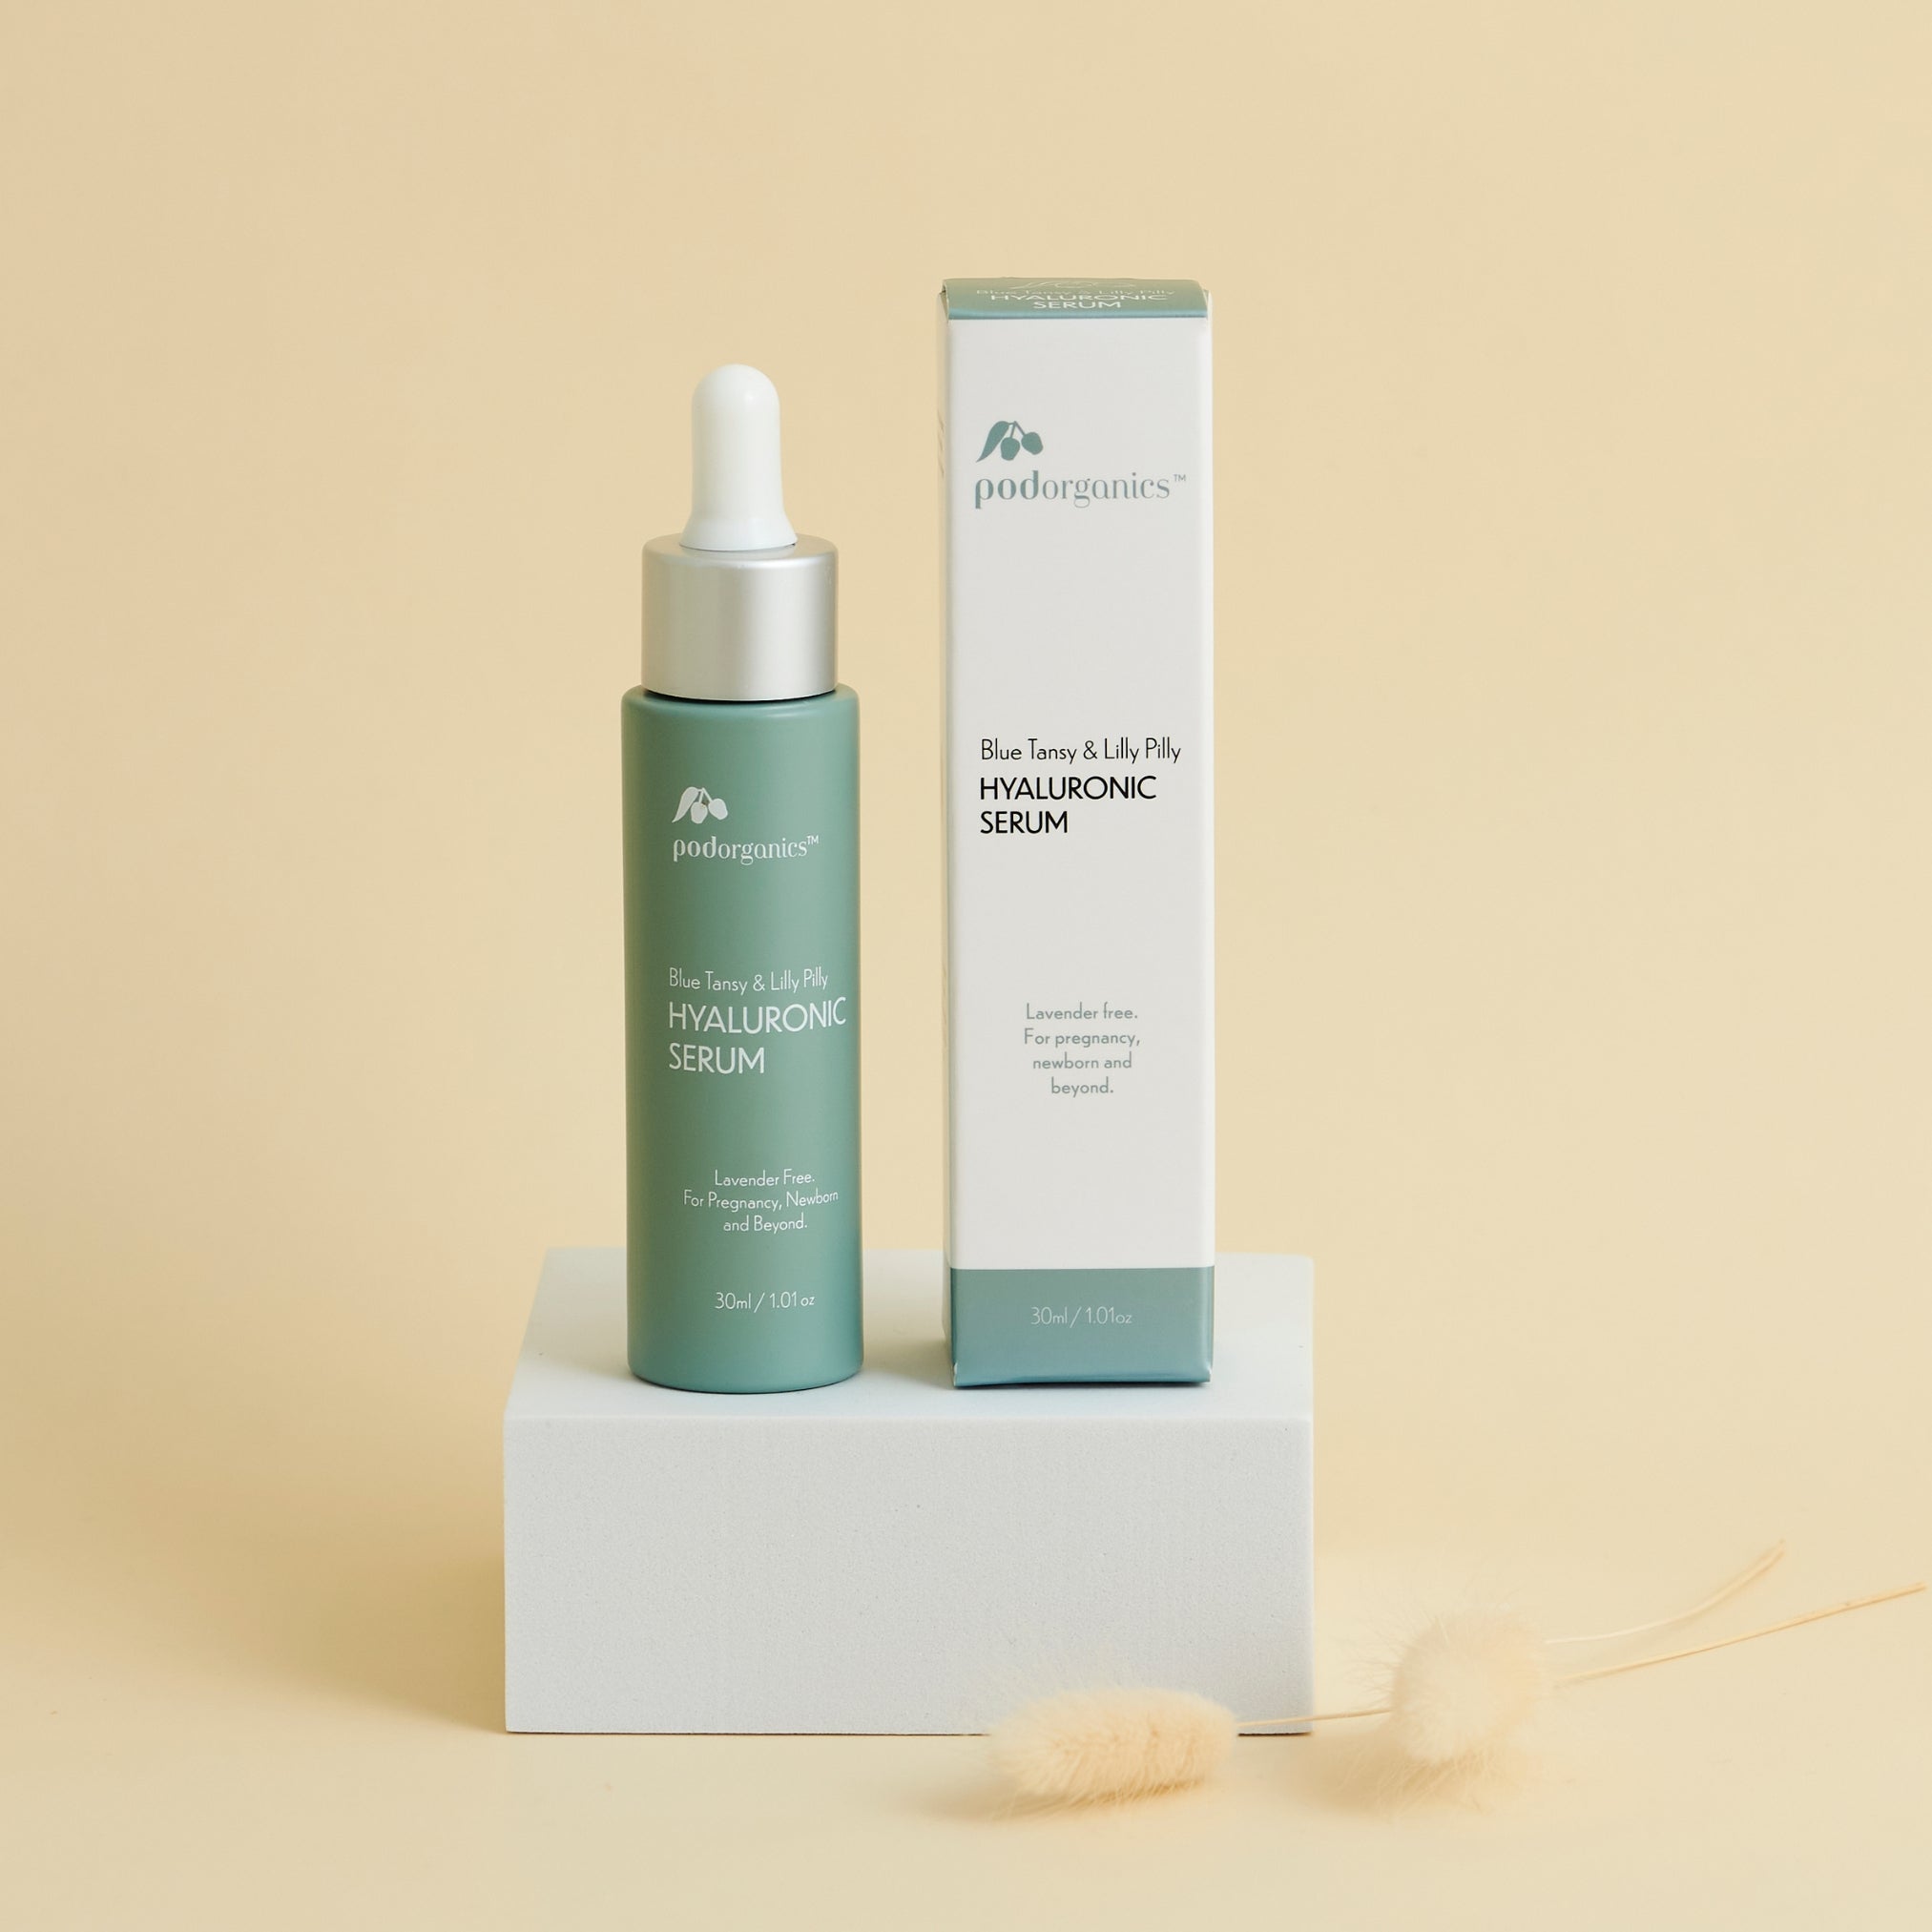 100% Organic multi-tasking fine line serum to hydrate, smooth, plump and brighten your skin. Soothe and reduce redness while hydrating and gently plumping the skin.  